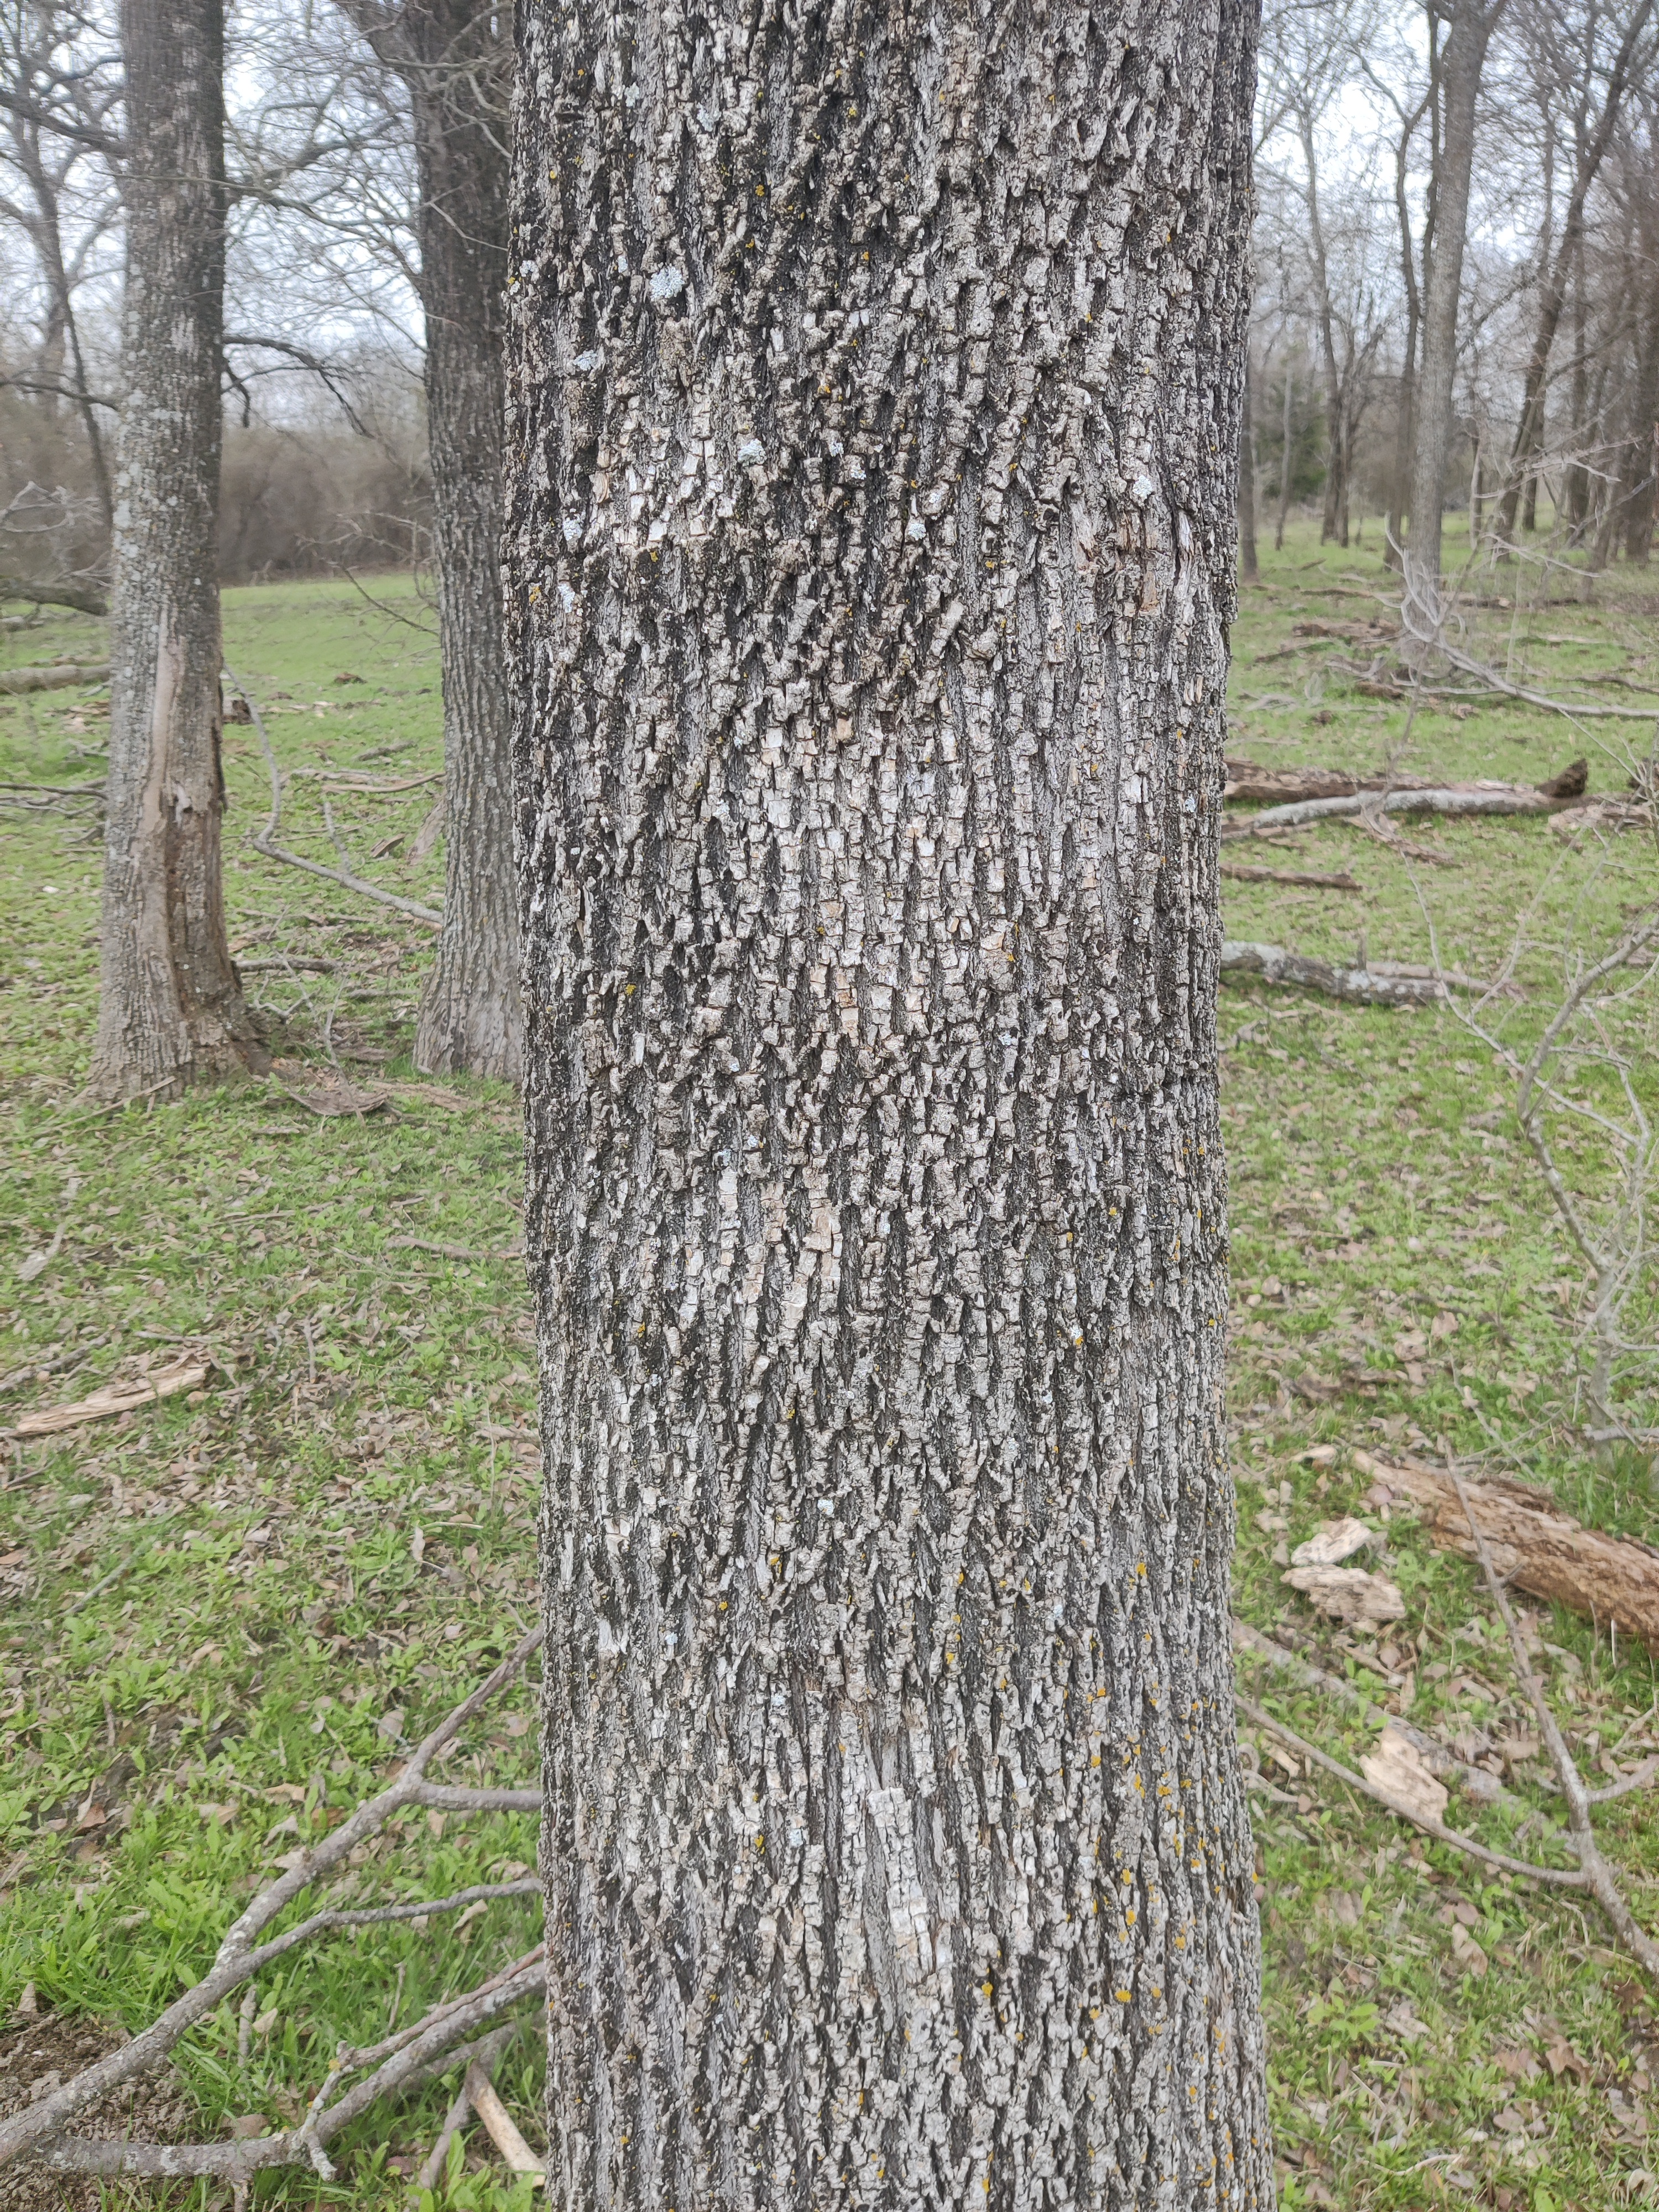 This is Cedar Elm right? Maybe ash?